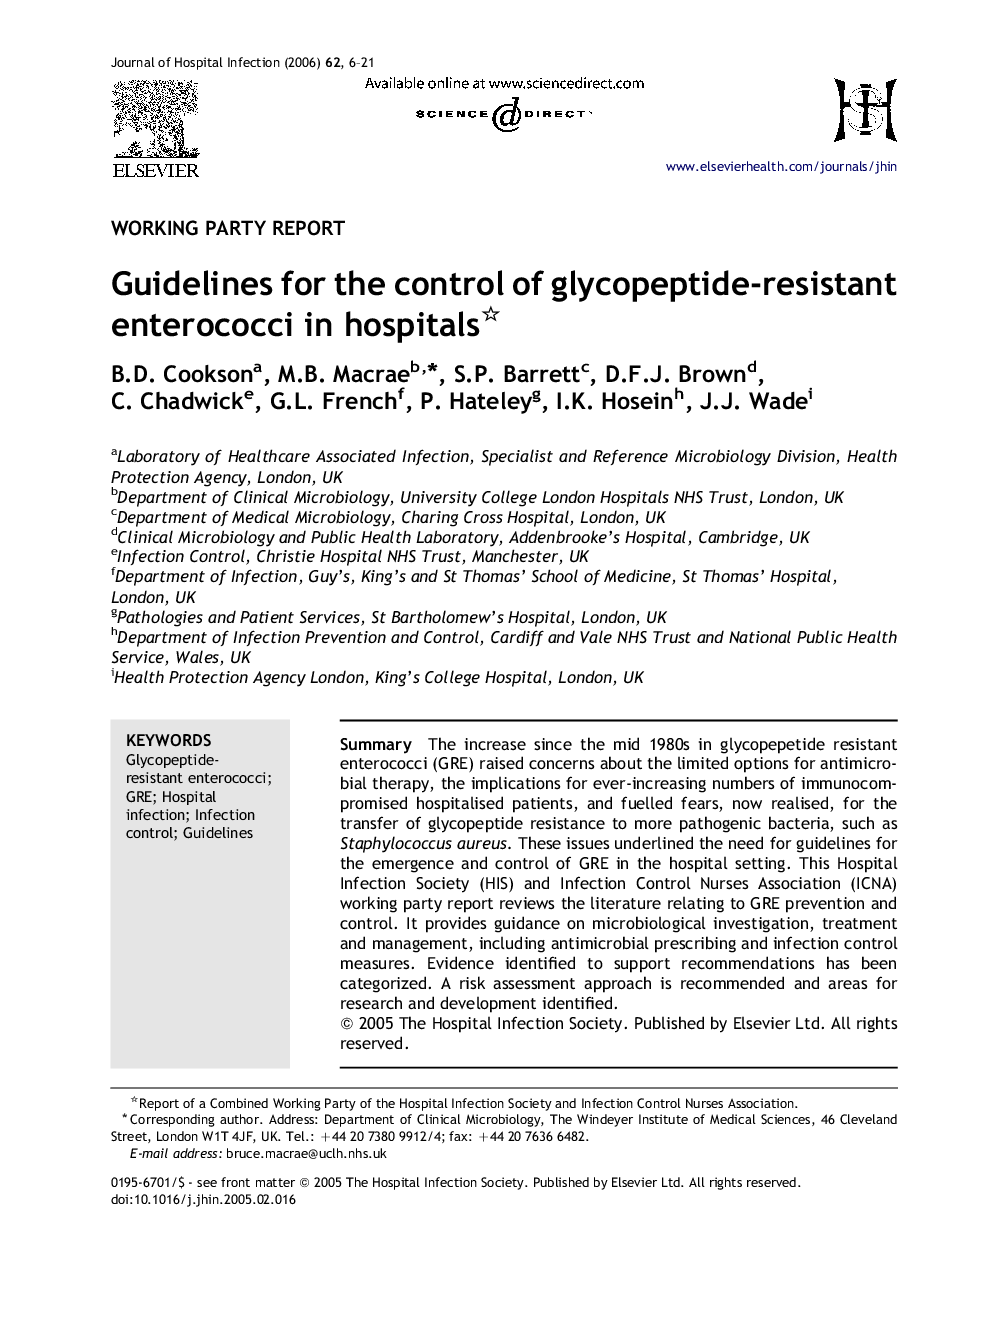 Guidelines for the control of glycopeptide-resistant enterococci in hospitals 